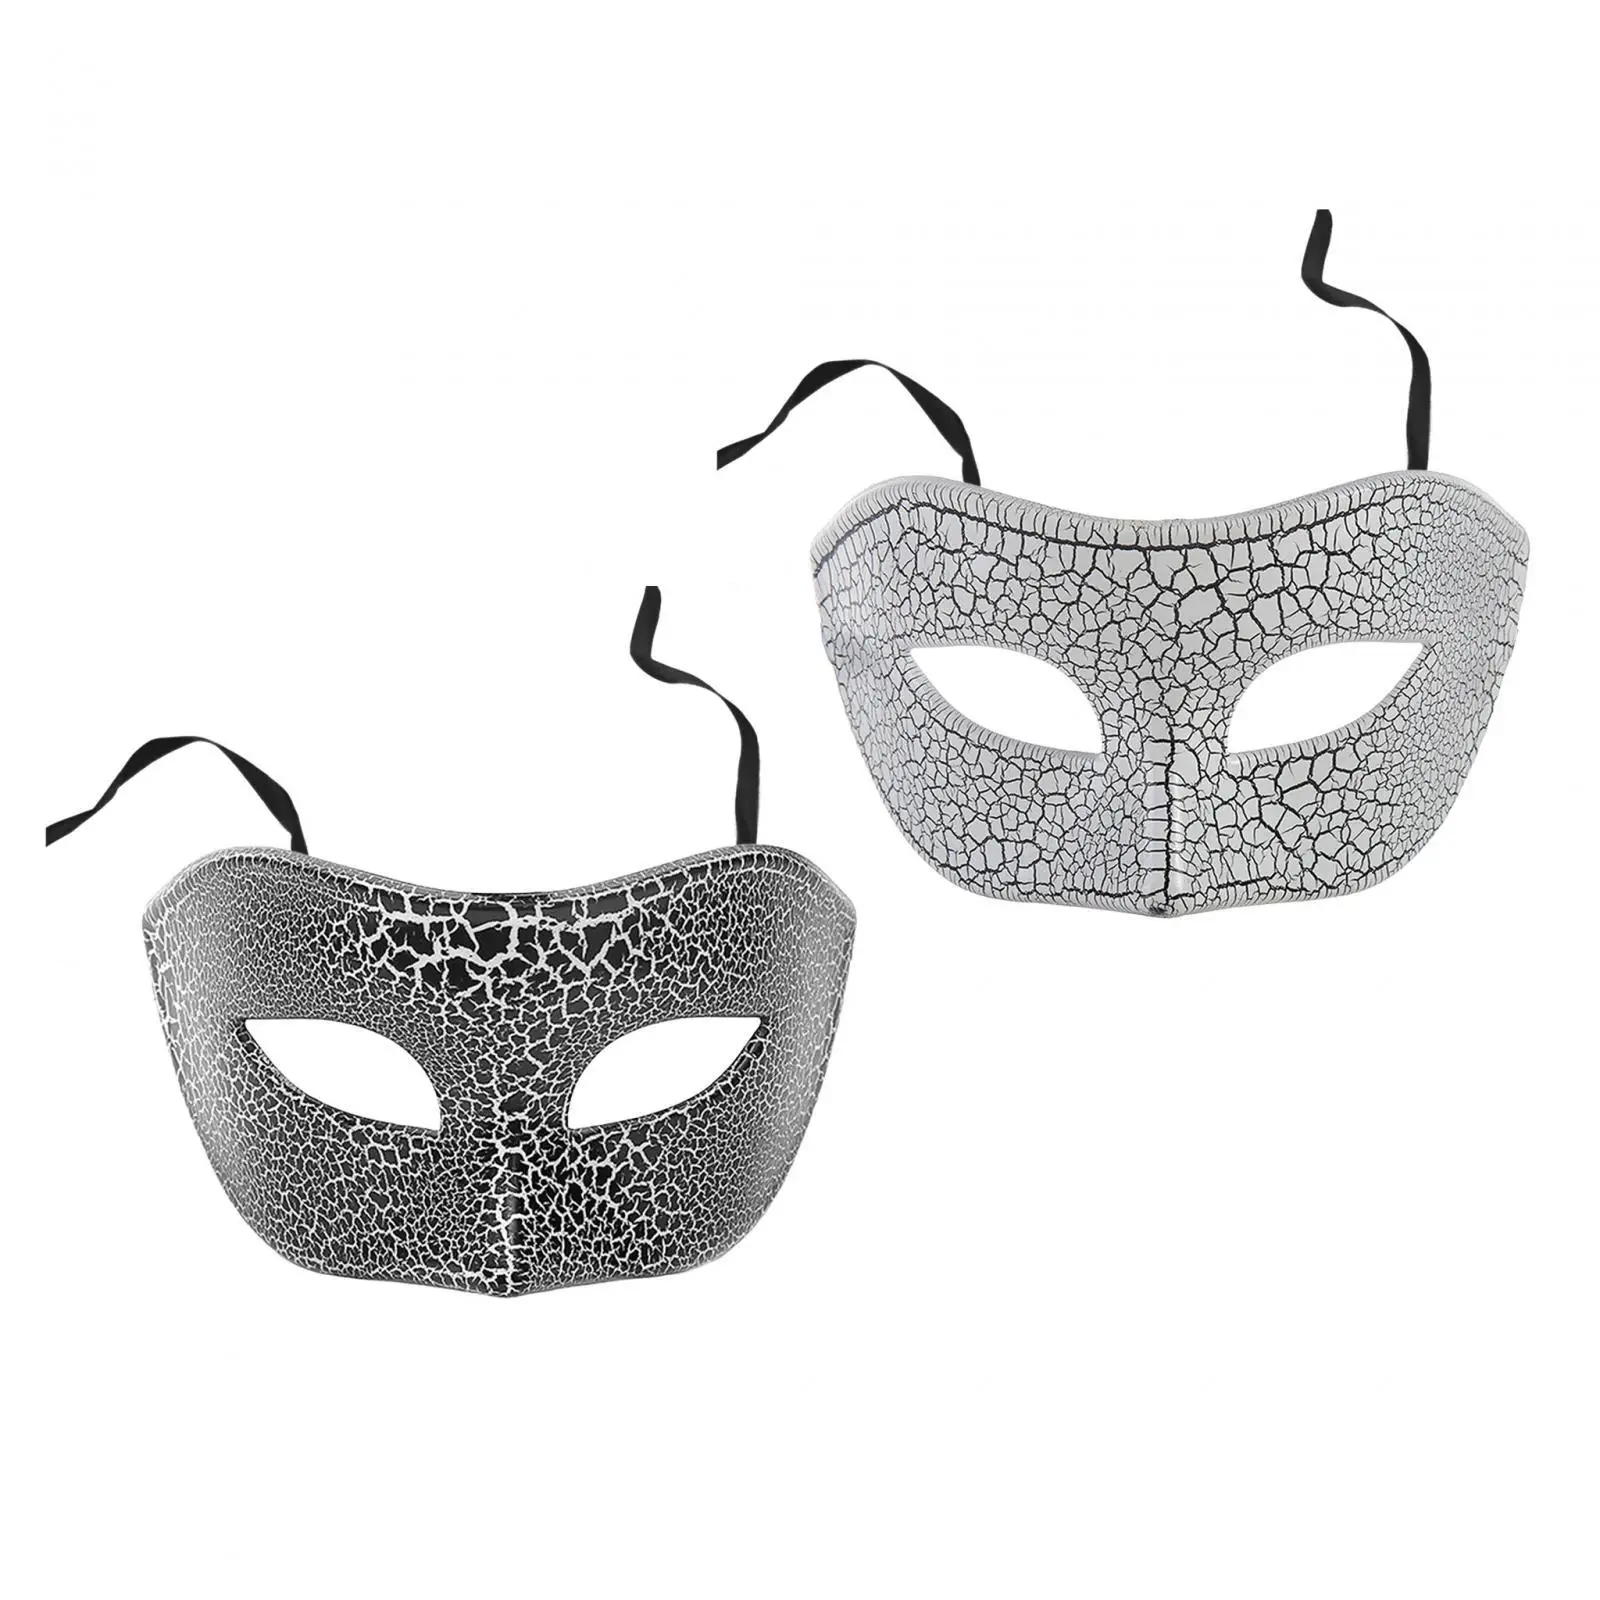 Masquerade Mask Costume Accessories Halloween Decor Party Supplies Mardi Gras Stage Performance Show Carnival Half Face Mask